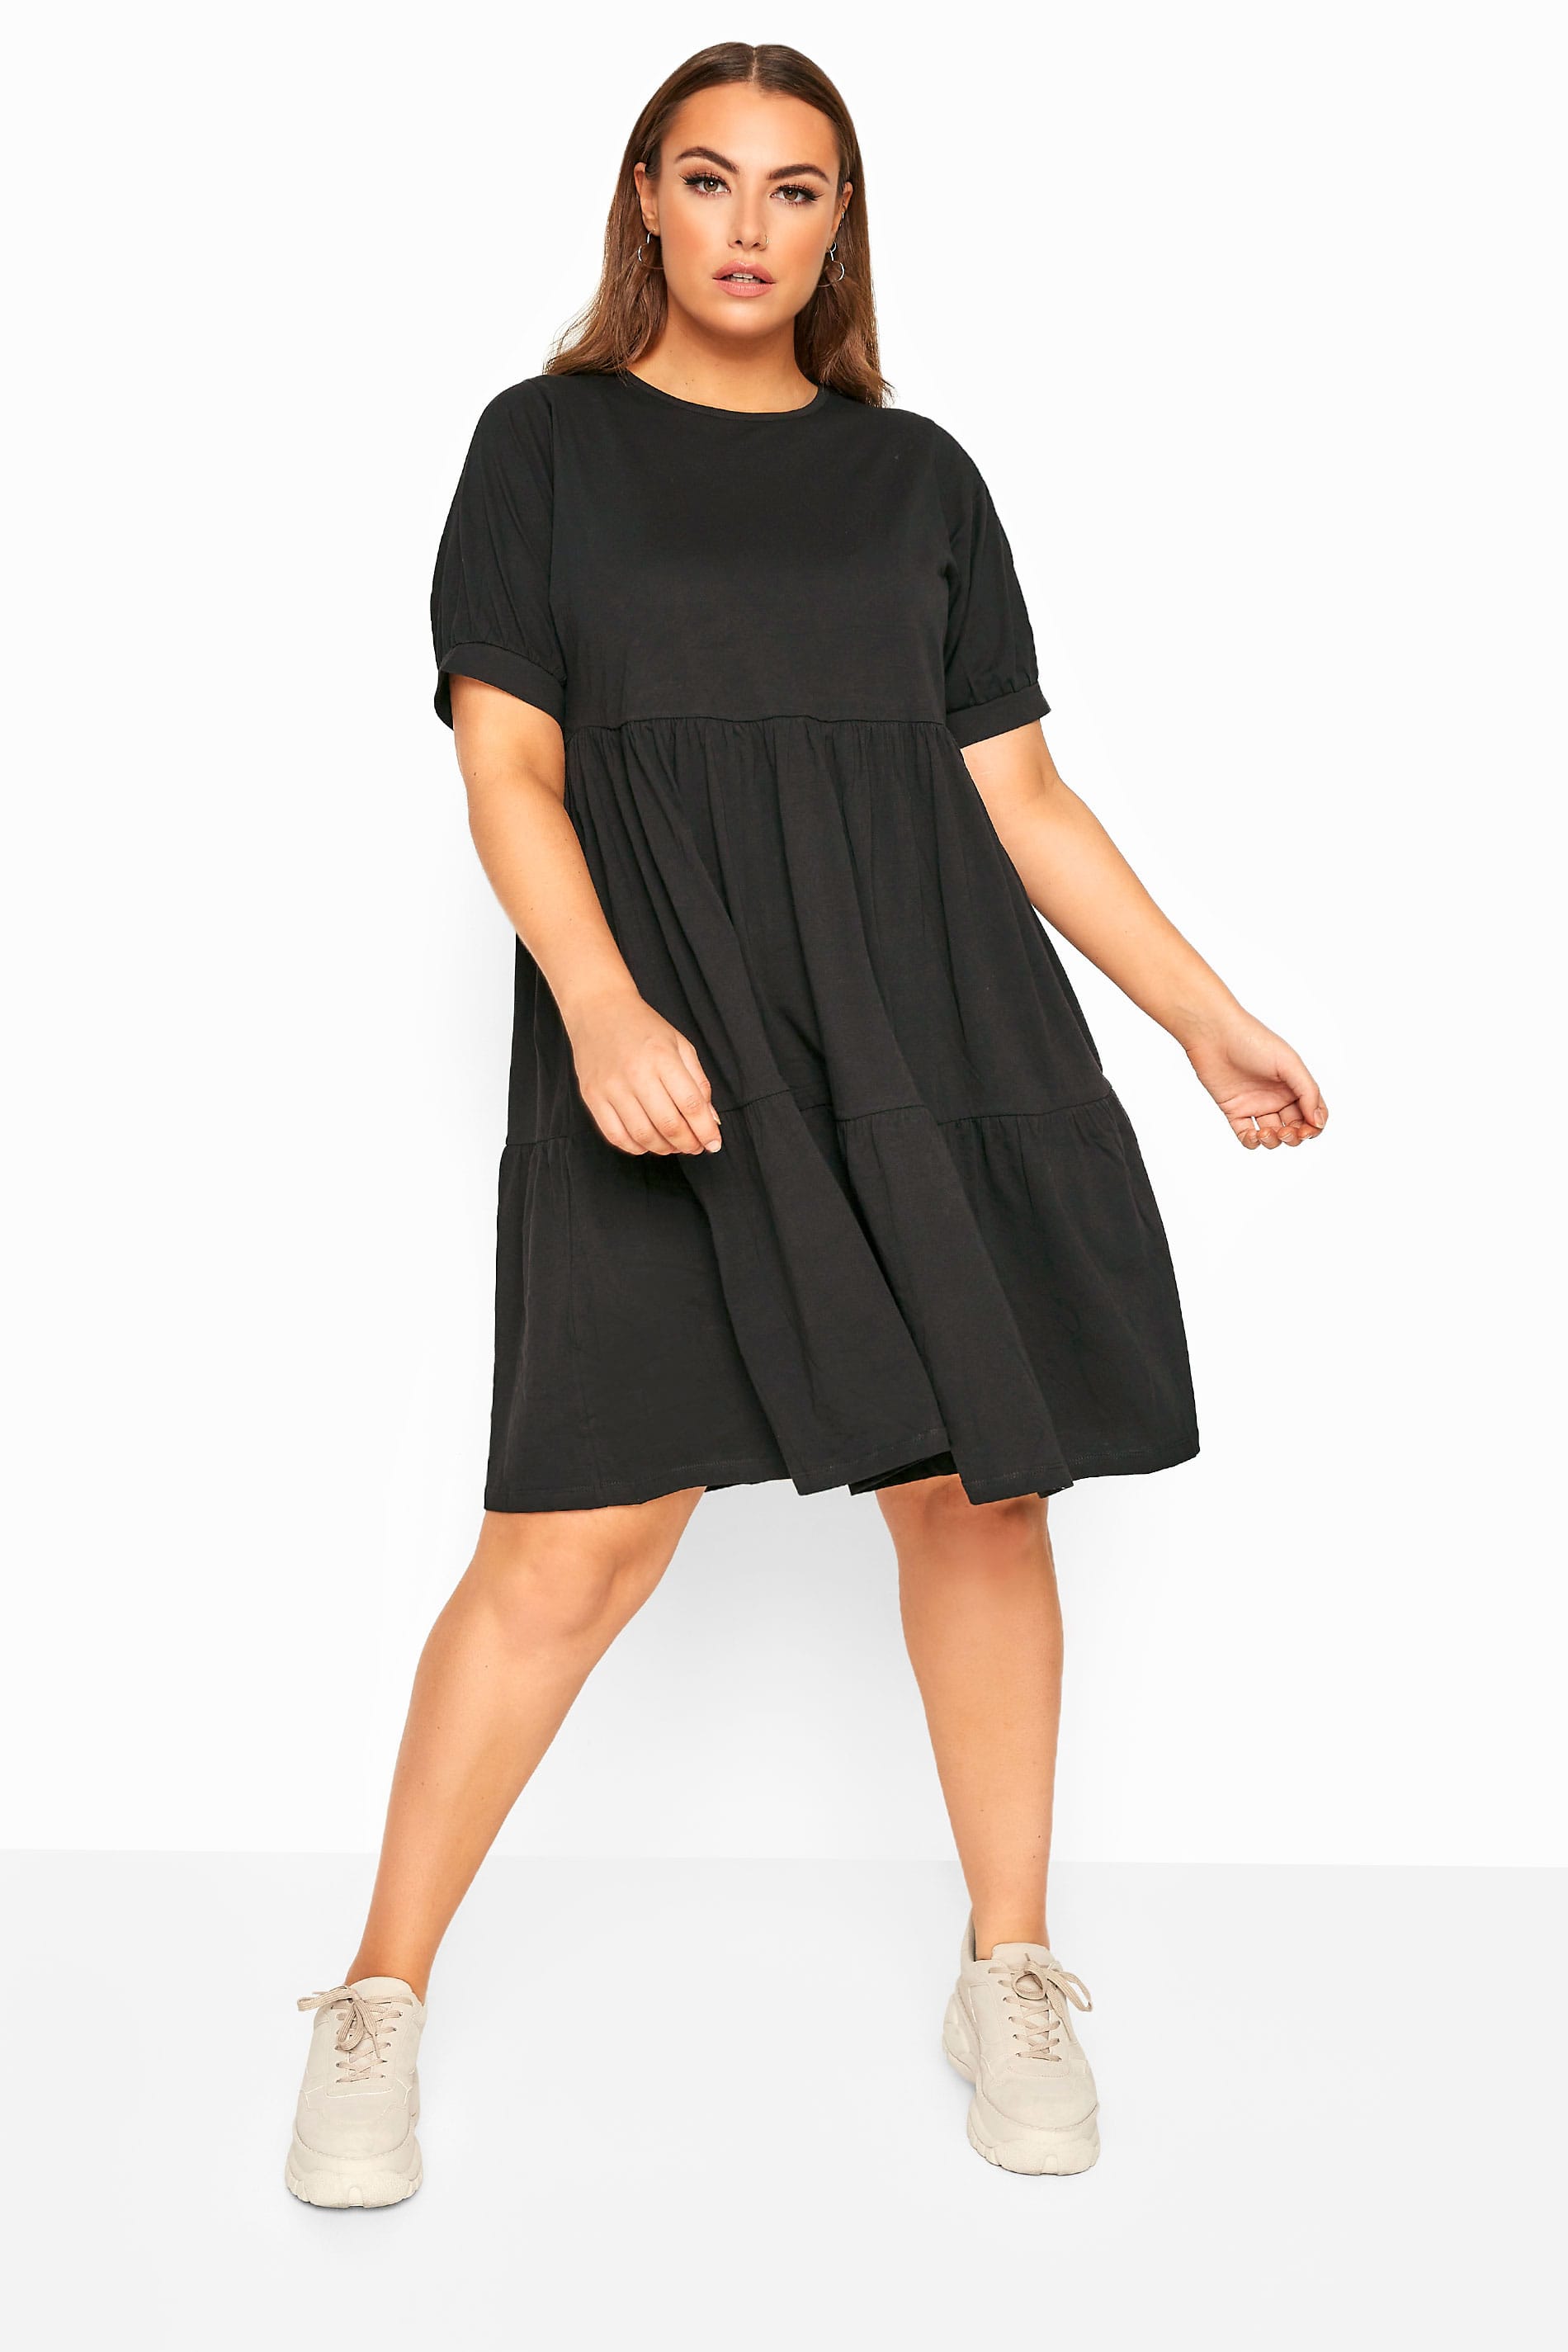 LIMITED COLLECTION Black Tiered Cotton Smock Dress_2766.jpg